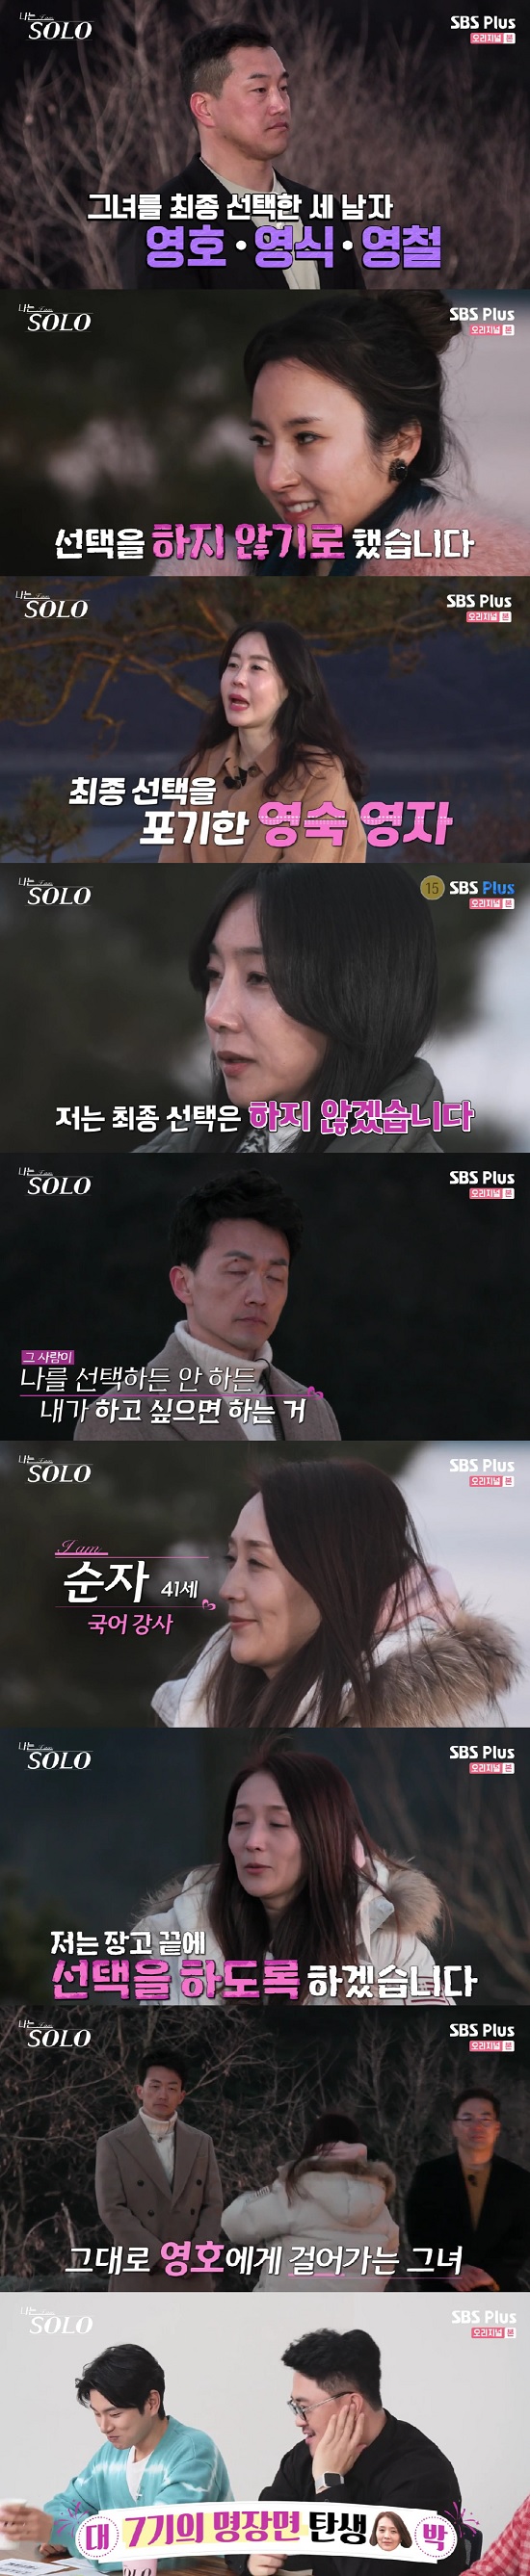 Couple Birth (I SOLO)SBS Plus and ENA PLAY Im SOLO, which aired on the 11th, revealed the final date results of the 7th Solo men and women ahead of the final Choices.In the final Choices on the day, Youngsu decided to postpone Choices and did not final Choices.Youngho said, The time we were together was a glorious time that I could not express with the word happiness.I think it will be a great strength to live happily, he said. I will do Choices. Defcon said, I have to go to Sunja, where I am angry. Song Hae-na said, What is it?I was so happy while I was here, so I do not want to go home. I want to stay in touch with you often, he said. There is someone who has beat my broken heart.I was really worried. I will Choice him. Yongsik approached Oksun, who finally Choices Oksun, not Youngsuk.Young-chul said, I think Im making a very good memory. I appreciate the new value gift. I will do the final Choices.Ok Soon received Choices from three men, Young Ho, Young Sik and Young Chul.Ok Soon said, I felt really funny, interesting and fun every time I was here and knew each person.But after I sorted my thoughts, I felt comfortable. I decided not to do Choices. Kyung-soo approached Jung-sook and told him his real name. Jung-sook said, I think there was not enough time to make a conclusion. I will not do the final Choices.Young-sook and Young-ja also gave up the final Choices.I can not say that I have spent a lot of time because of various situations, but I can not say that I have spent hard because I have a helpless time.I think I want to do it, and I will do Choices at the end of Django. After that, he approached Youngho and said, I will not tell you my real name.There was no couple in the seventh episode of Im SOLO, but two months after the filming, Young-ho and Sun-ja appeared with hugs and hand-clicks, saying, Do what you did.Young-ho told Sun-ja, 40sI wanted to do it with my heart. I wanted to try Date with my heart. I have someone who wants to do it together. I will Choices the woman who has made it possible to make crazy love over 40, he said.In the meantime, Youngho approached Soonja and said, My name is a chewy. He then played The Kiss and announced the first couple of Im SOLO 7.The MCs were attracted to the eyes with a startled look.Photo: SBS Plus broadcast screen